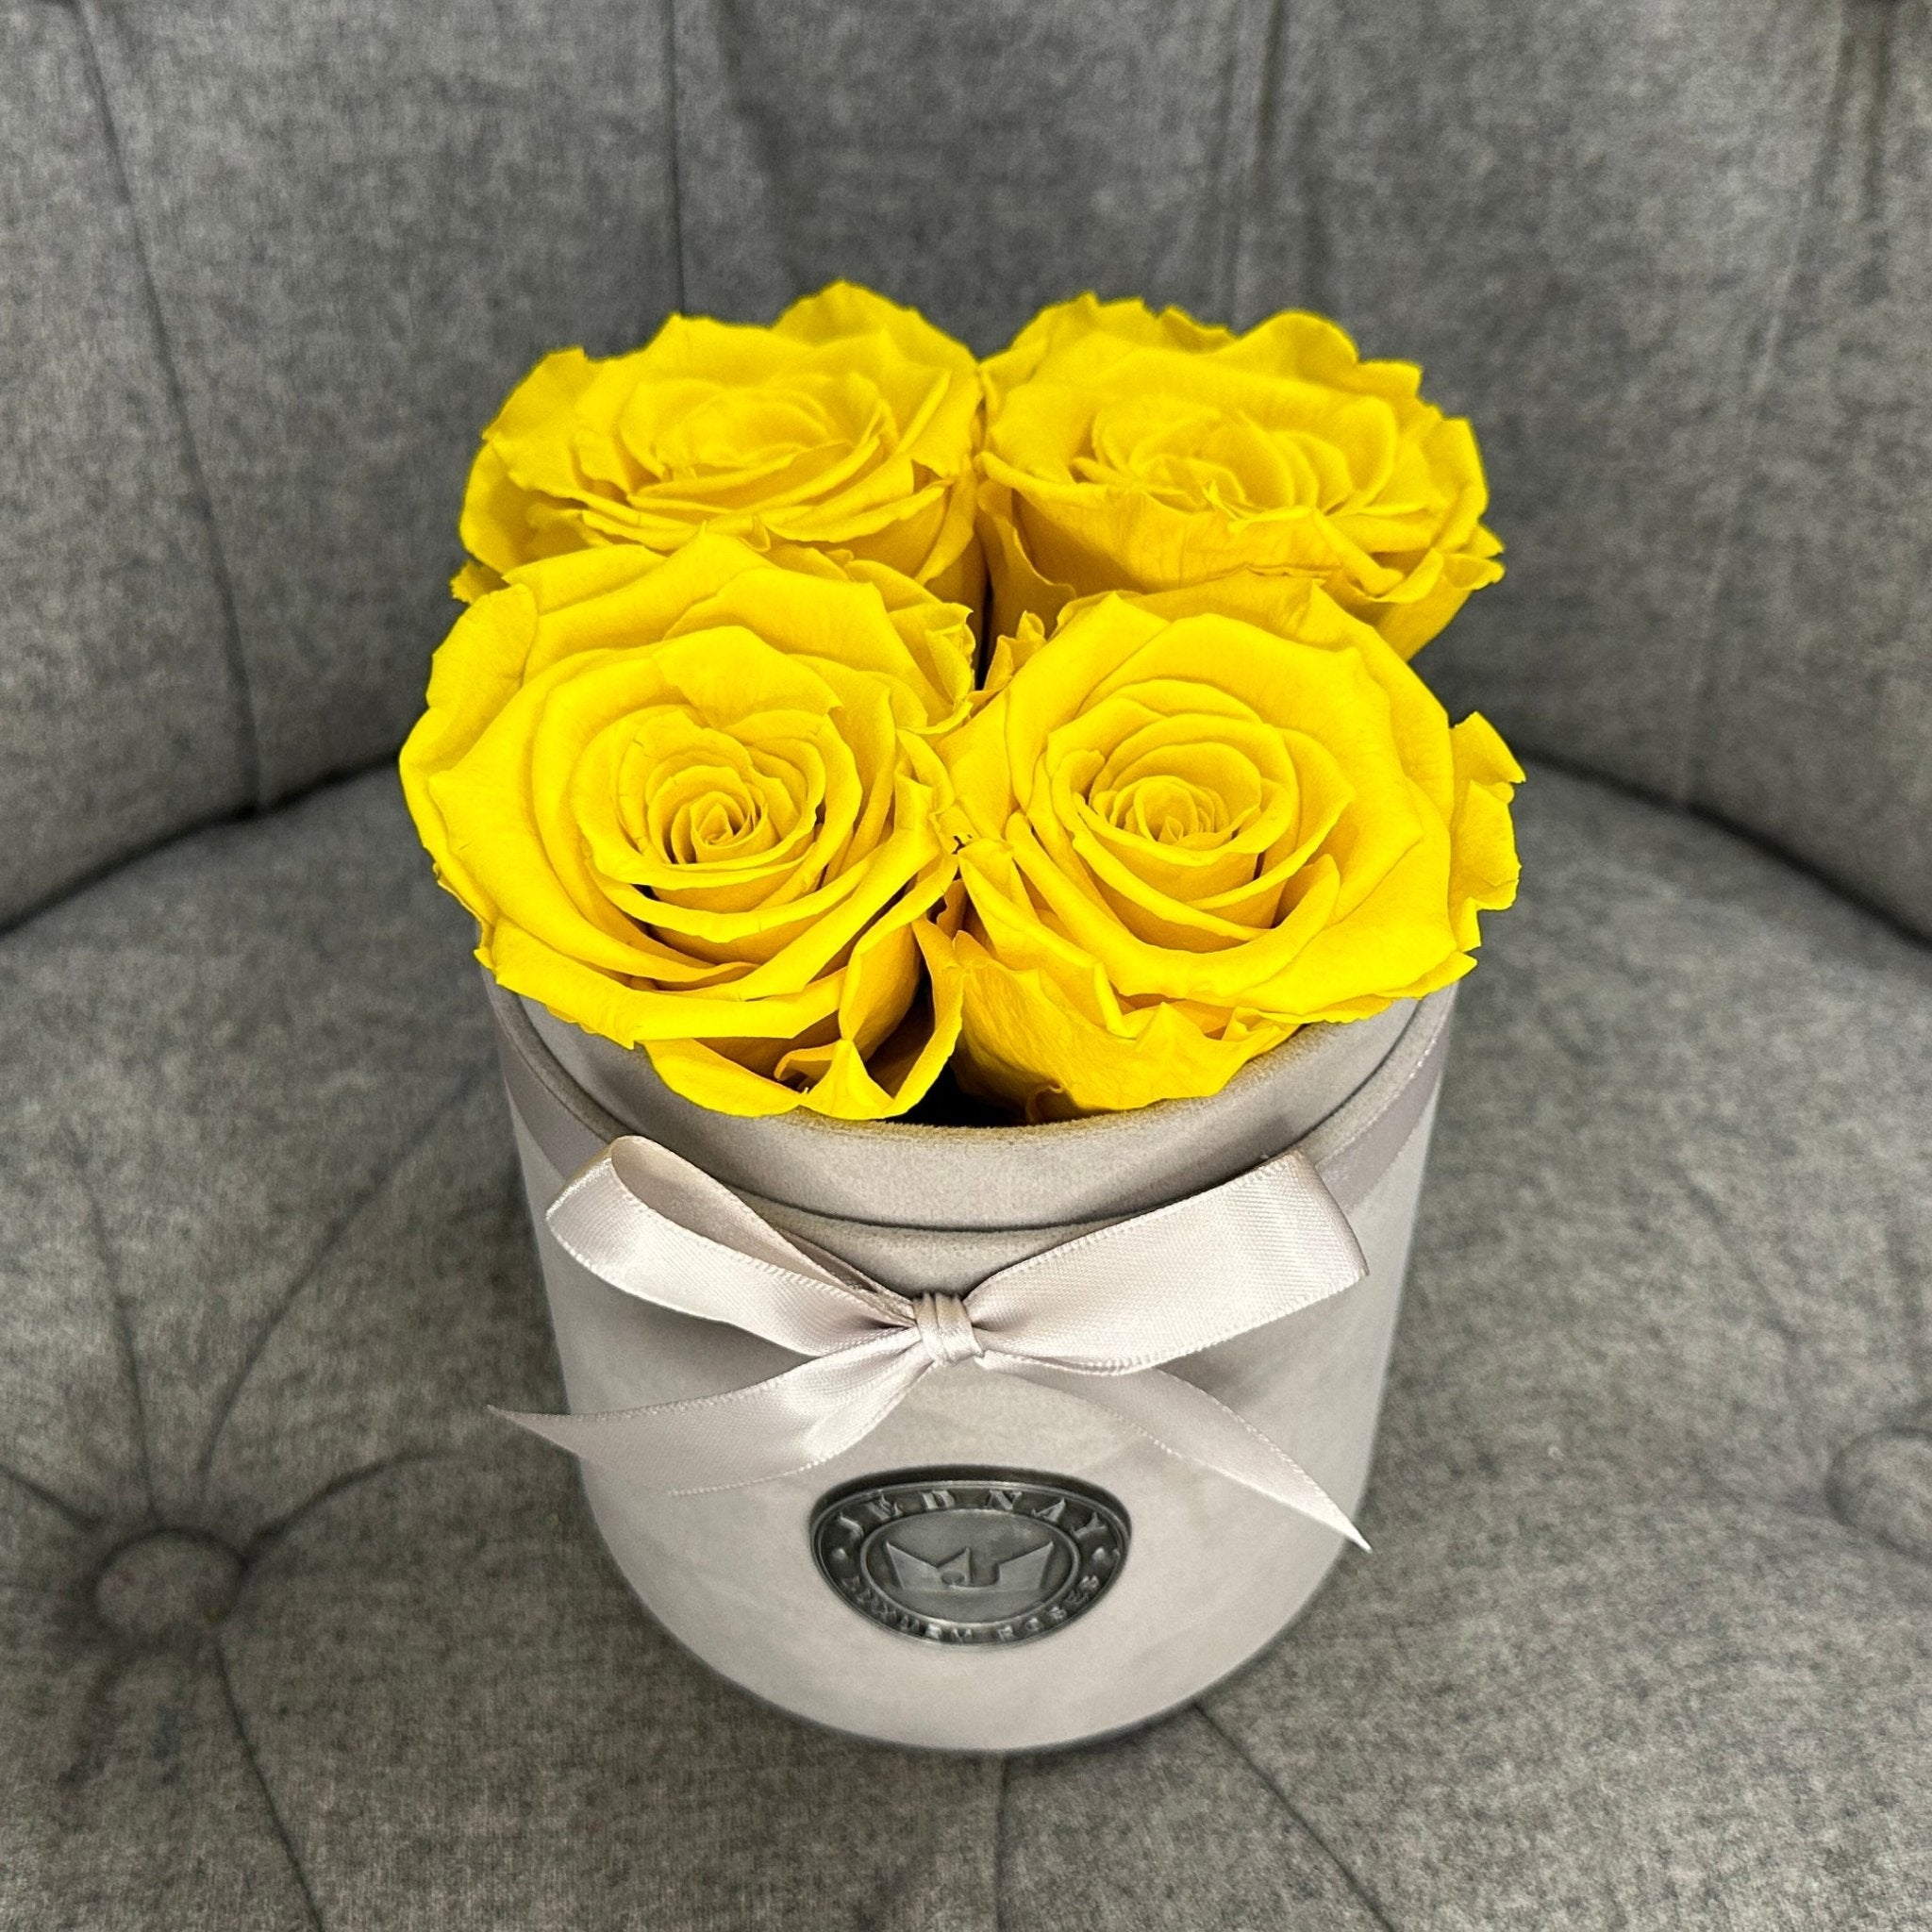 Petite Grey Suede Forever Rose Box - Sunshine Yellow Eternal Roses - Jednay Roses